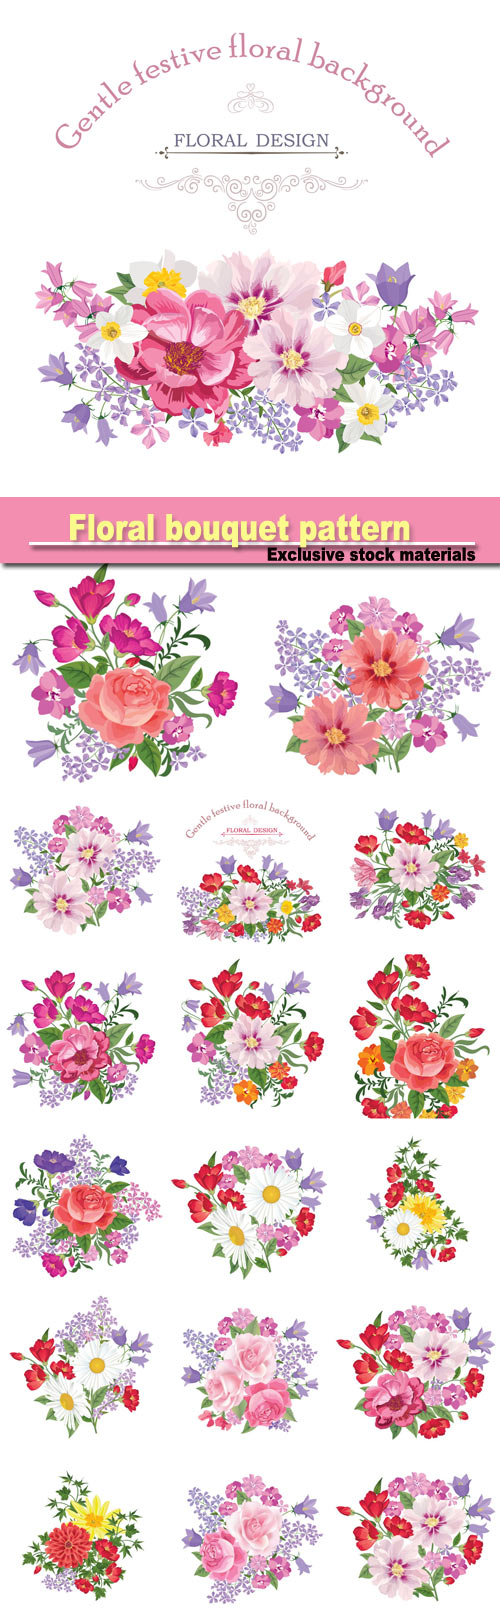 Floral bouquet pattern, vintage vector card with flowers